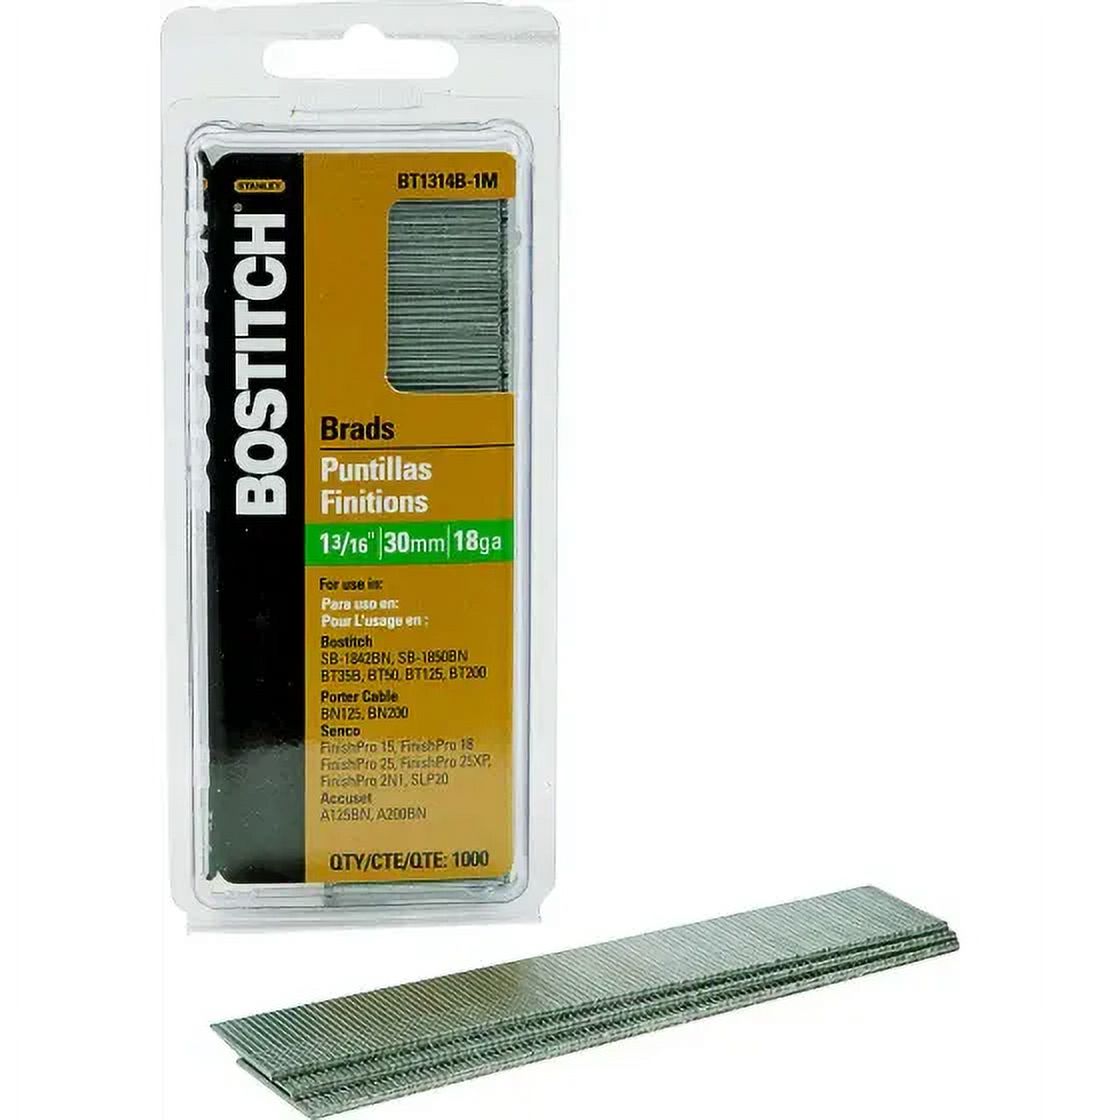 Stanley Bostitch BT1314B-1M Nail, 1-3/16 in L, 18 Gauge, Steel, Coated, Brad Head, Smooth Shank (Case of 10) - image 1 of 1